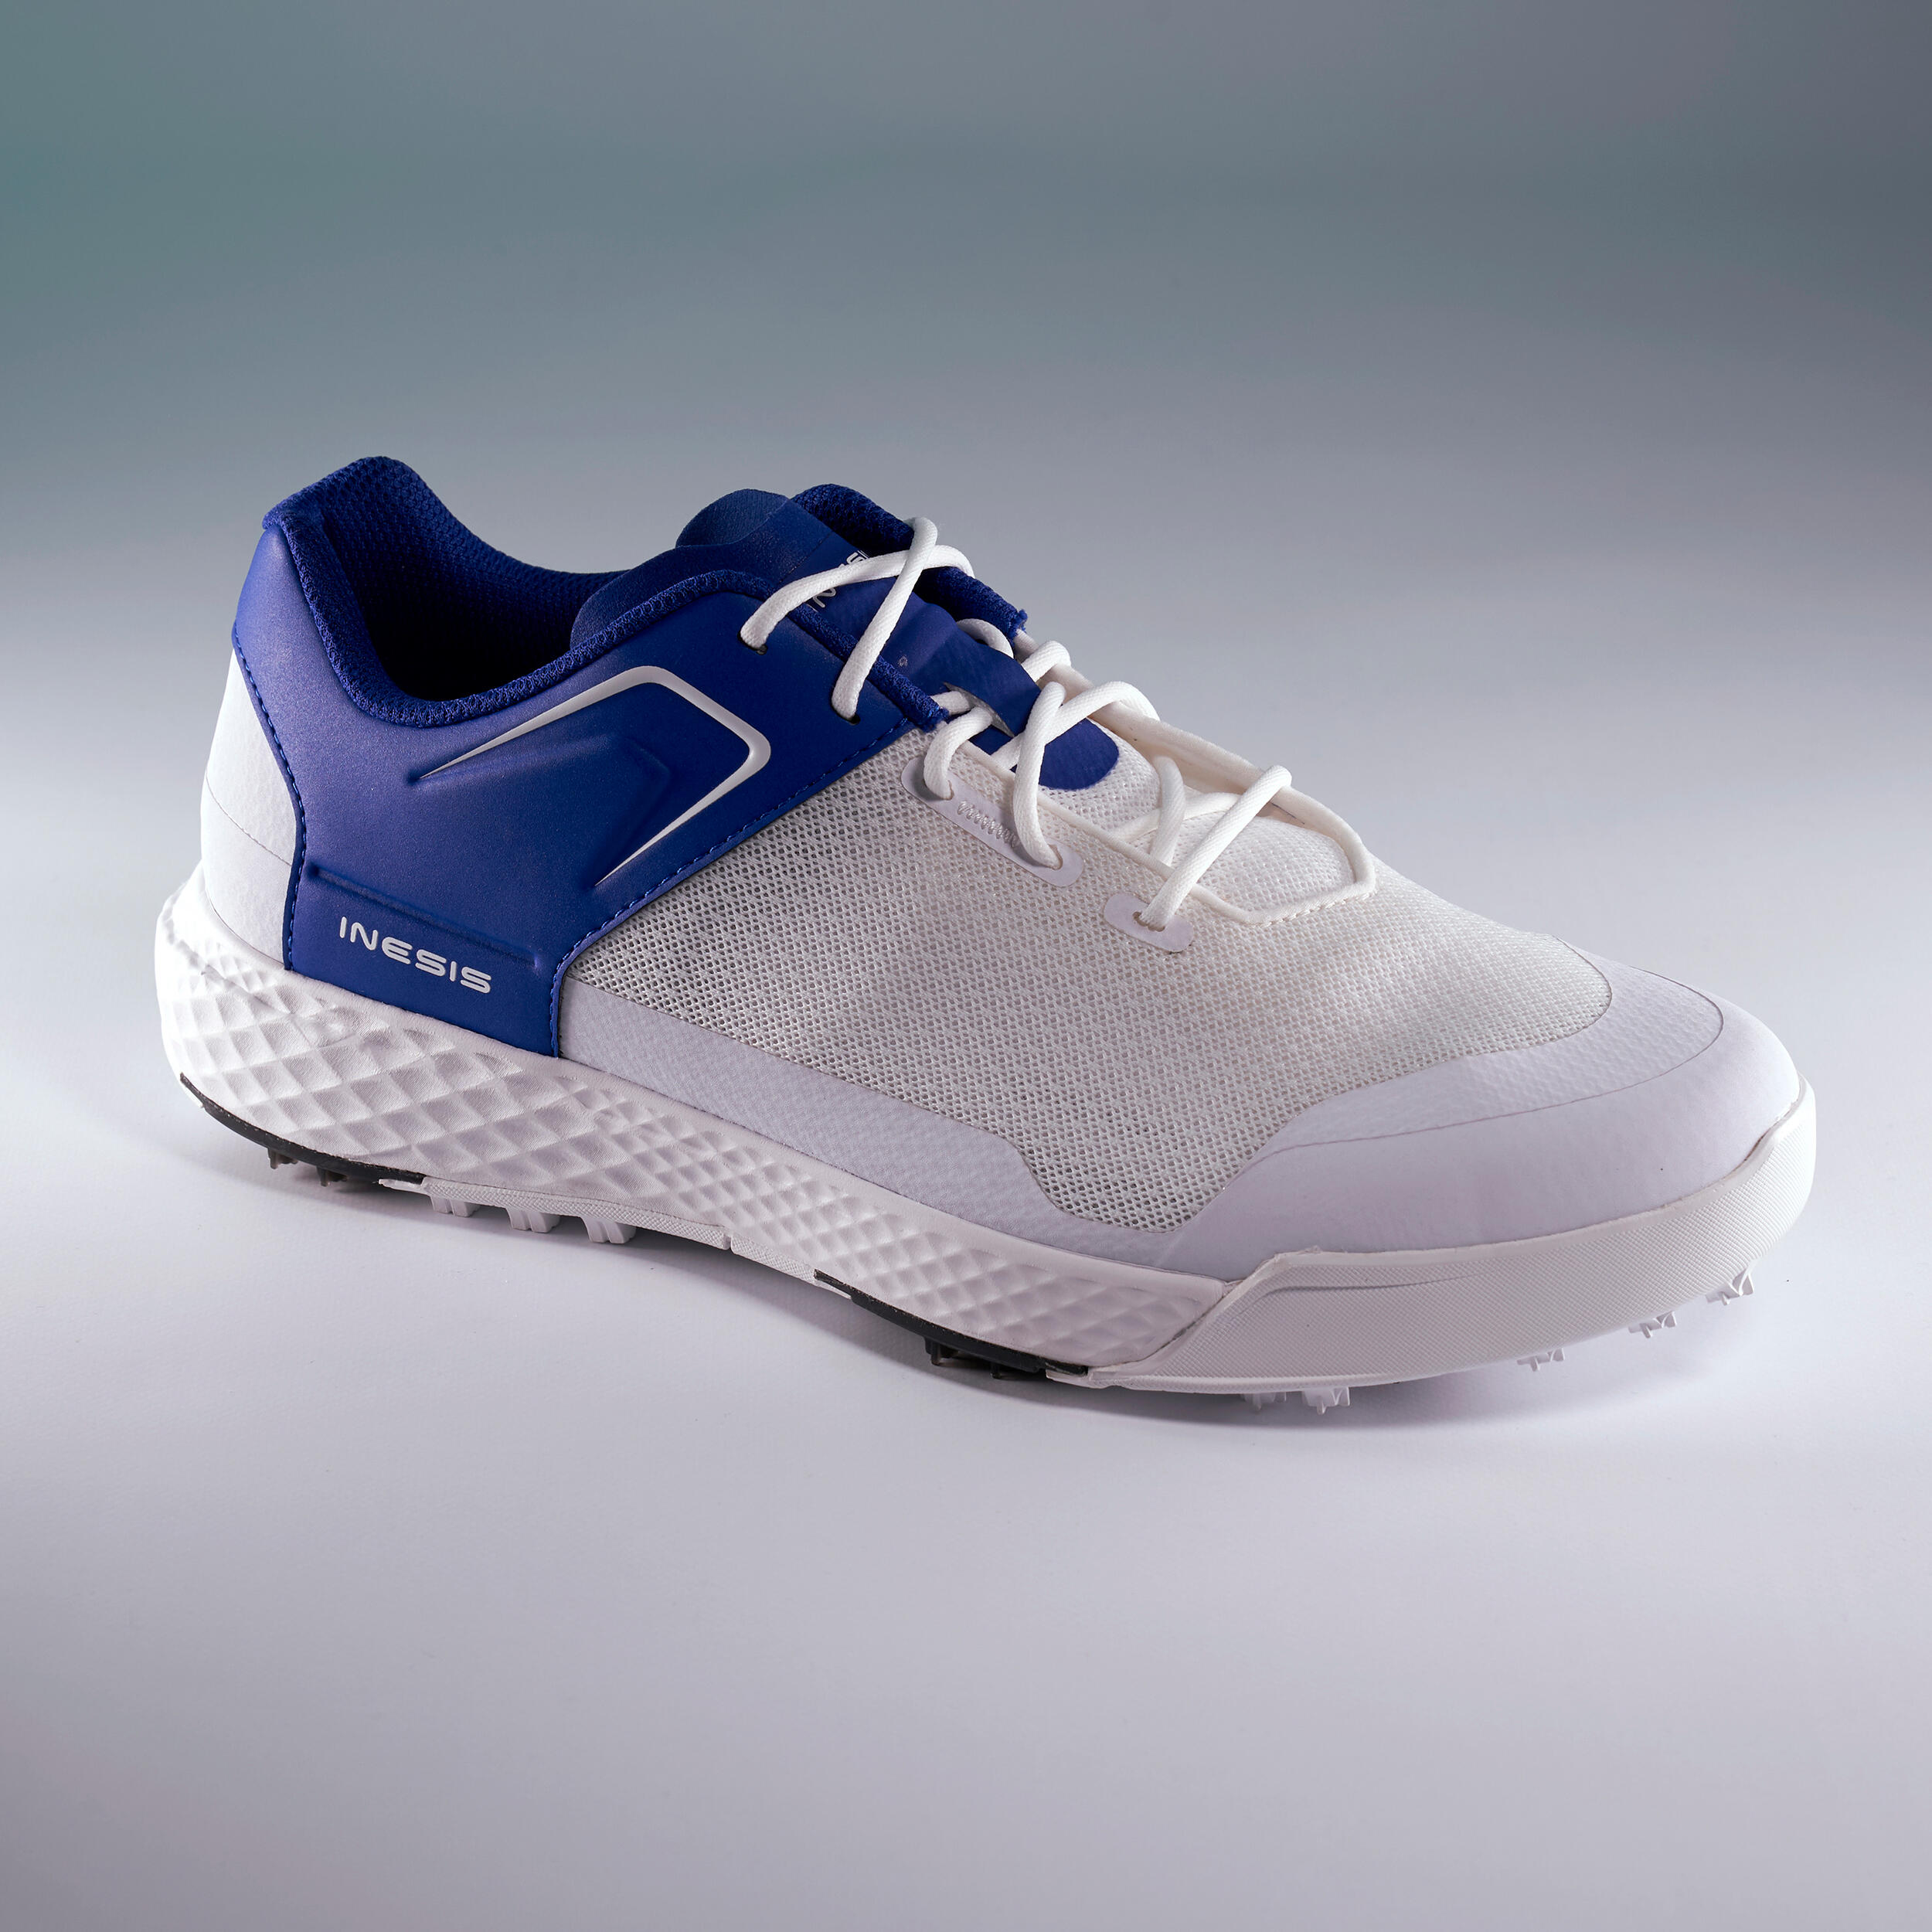 MEN’S GRIP SUMMER GOLF SHOES WHITE AND BLUE 2/13